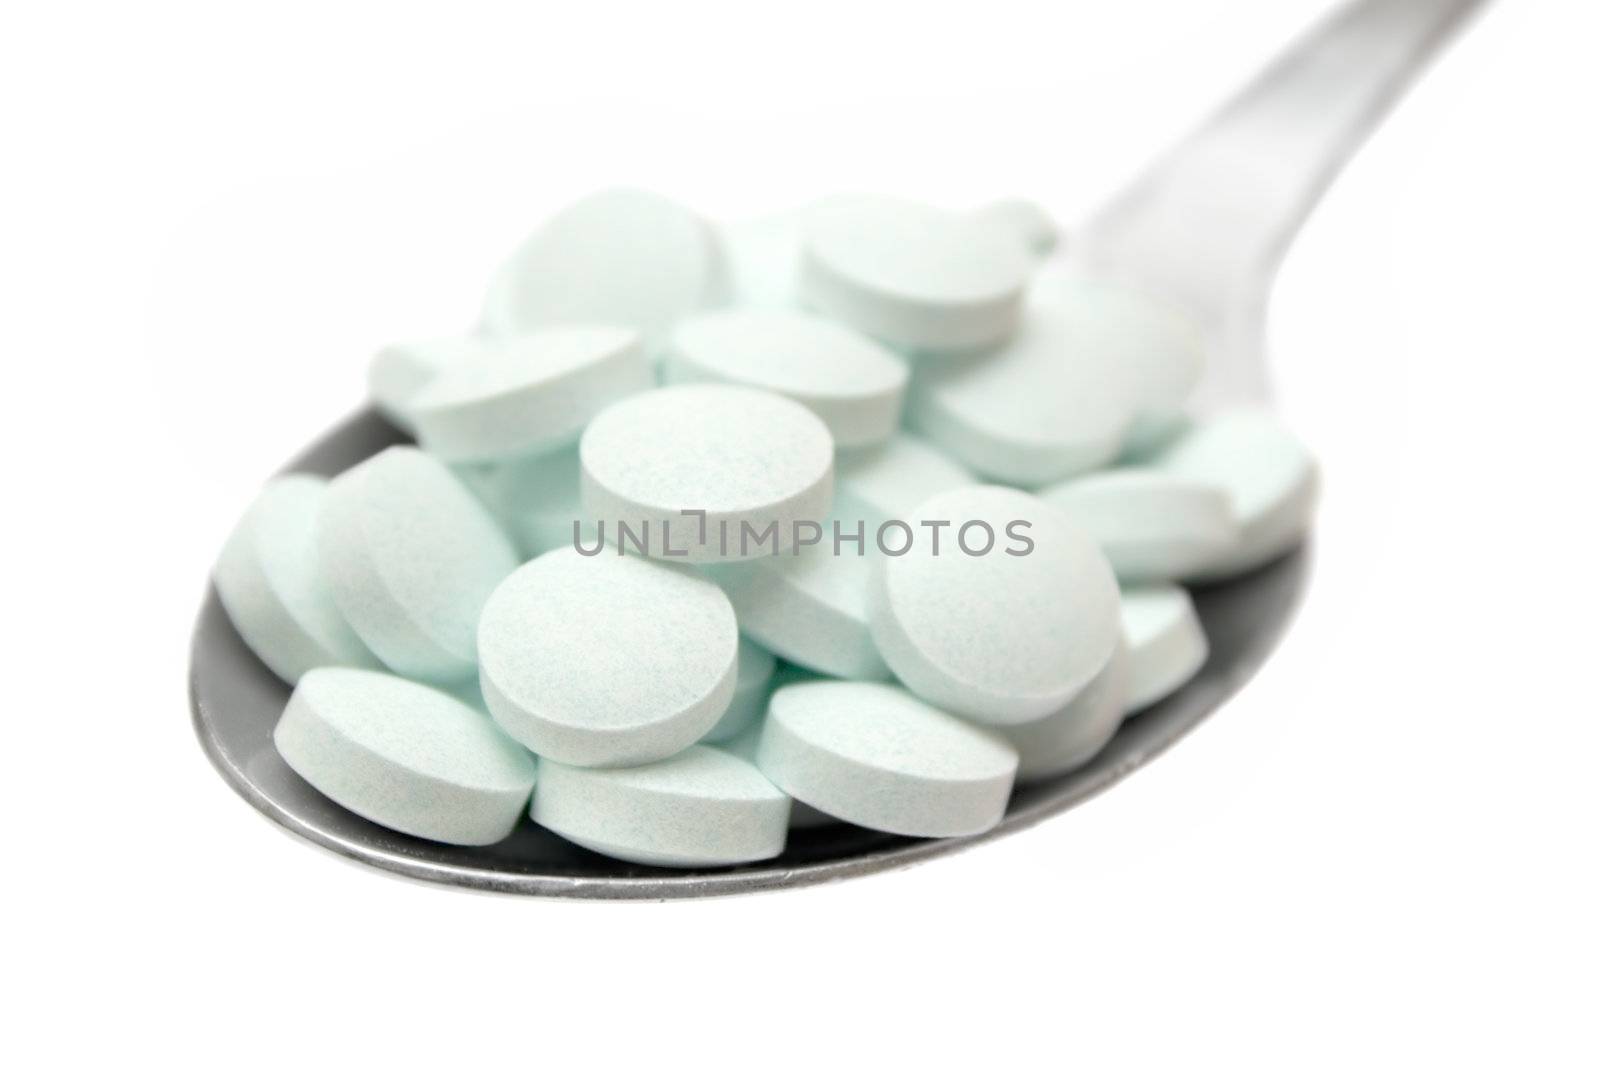 Spoonful of Tablets by winterling